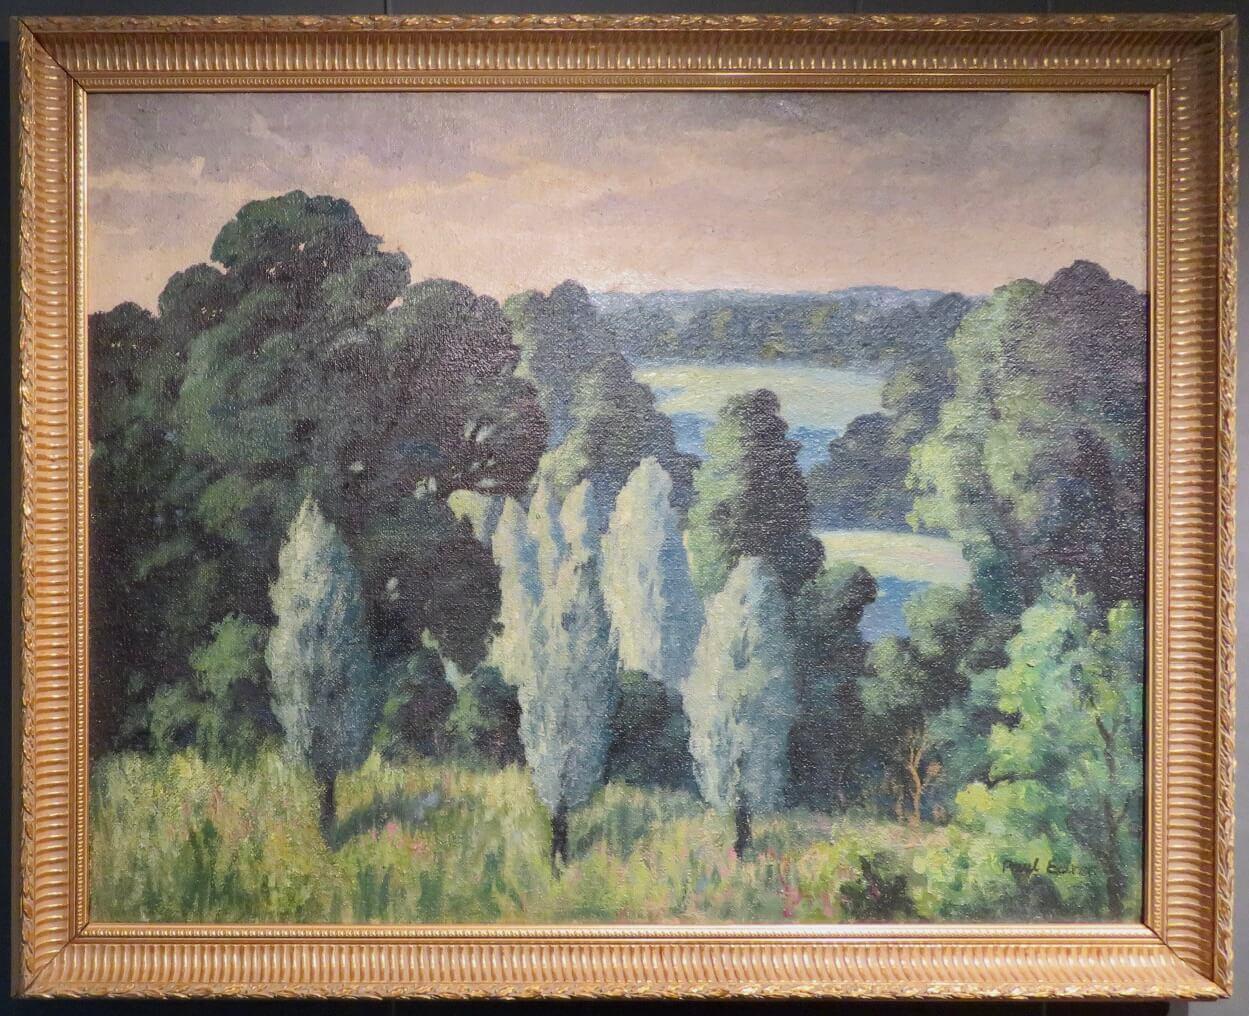 ARTIST: Paul Earee (1888-1968) British

TITLE: “Sudbury Suffolk”

SIGNED: lower right

MEDIUM: oil on canvas

SIZE: 101cm x 81cm inc frame

CONDITION: excellent

DETAIL: As Frederick Percy Eary, he was born at Sudbury, Suffolk on 16 July 1888, son